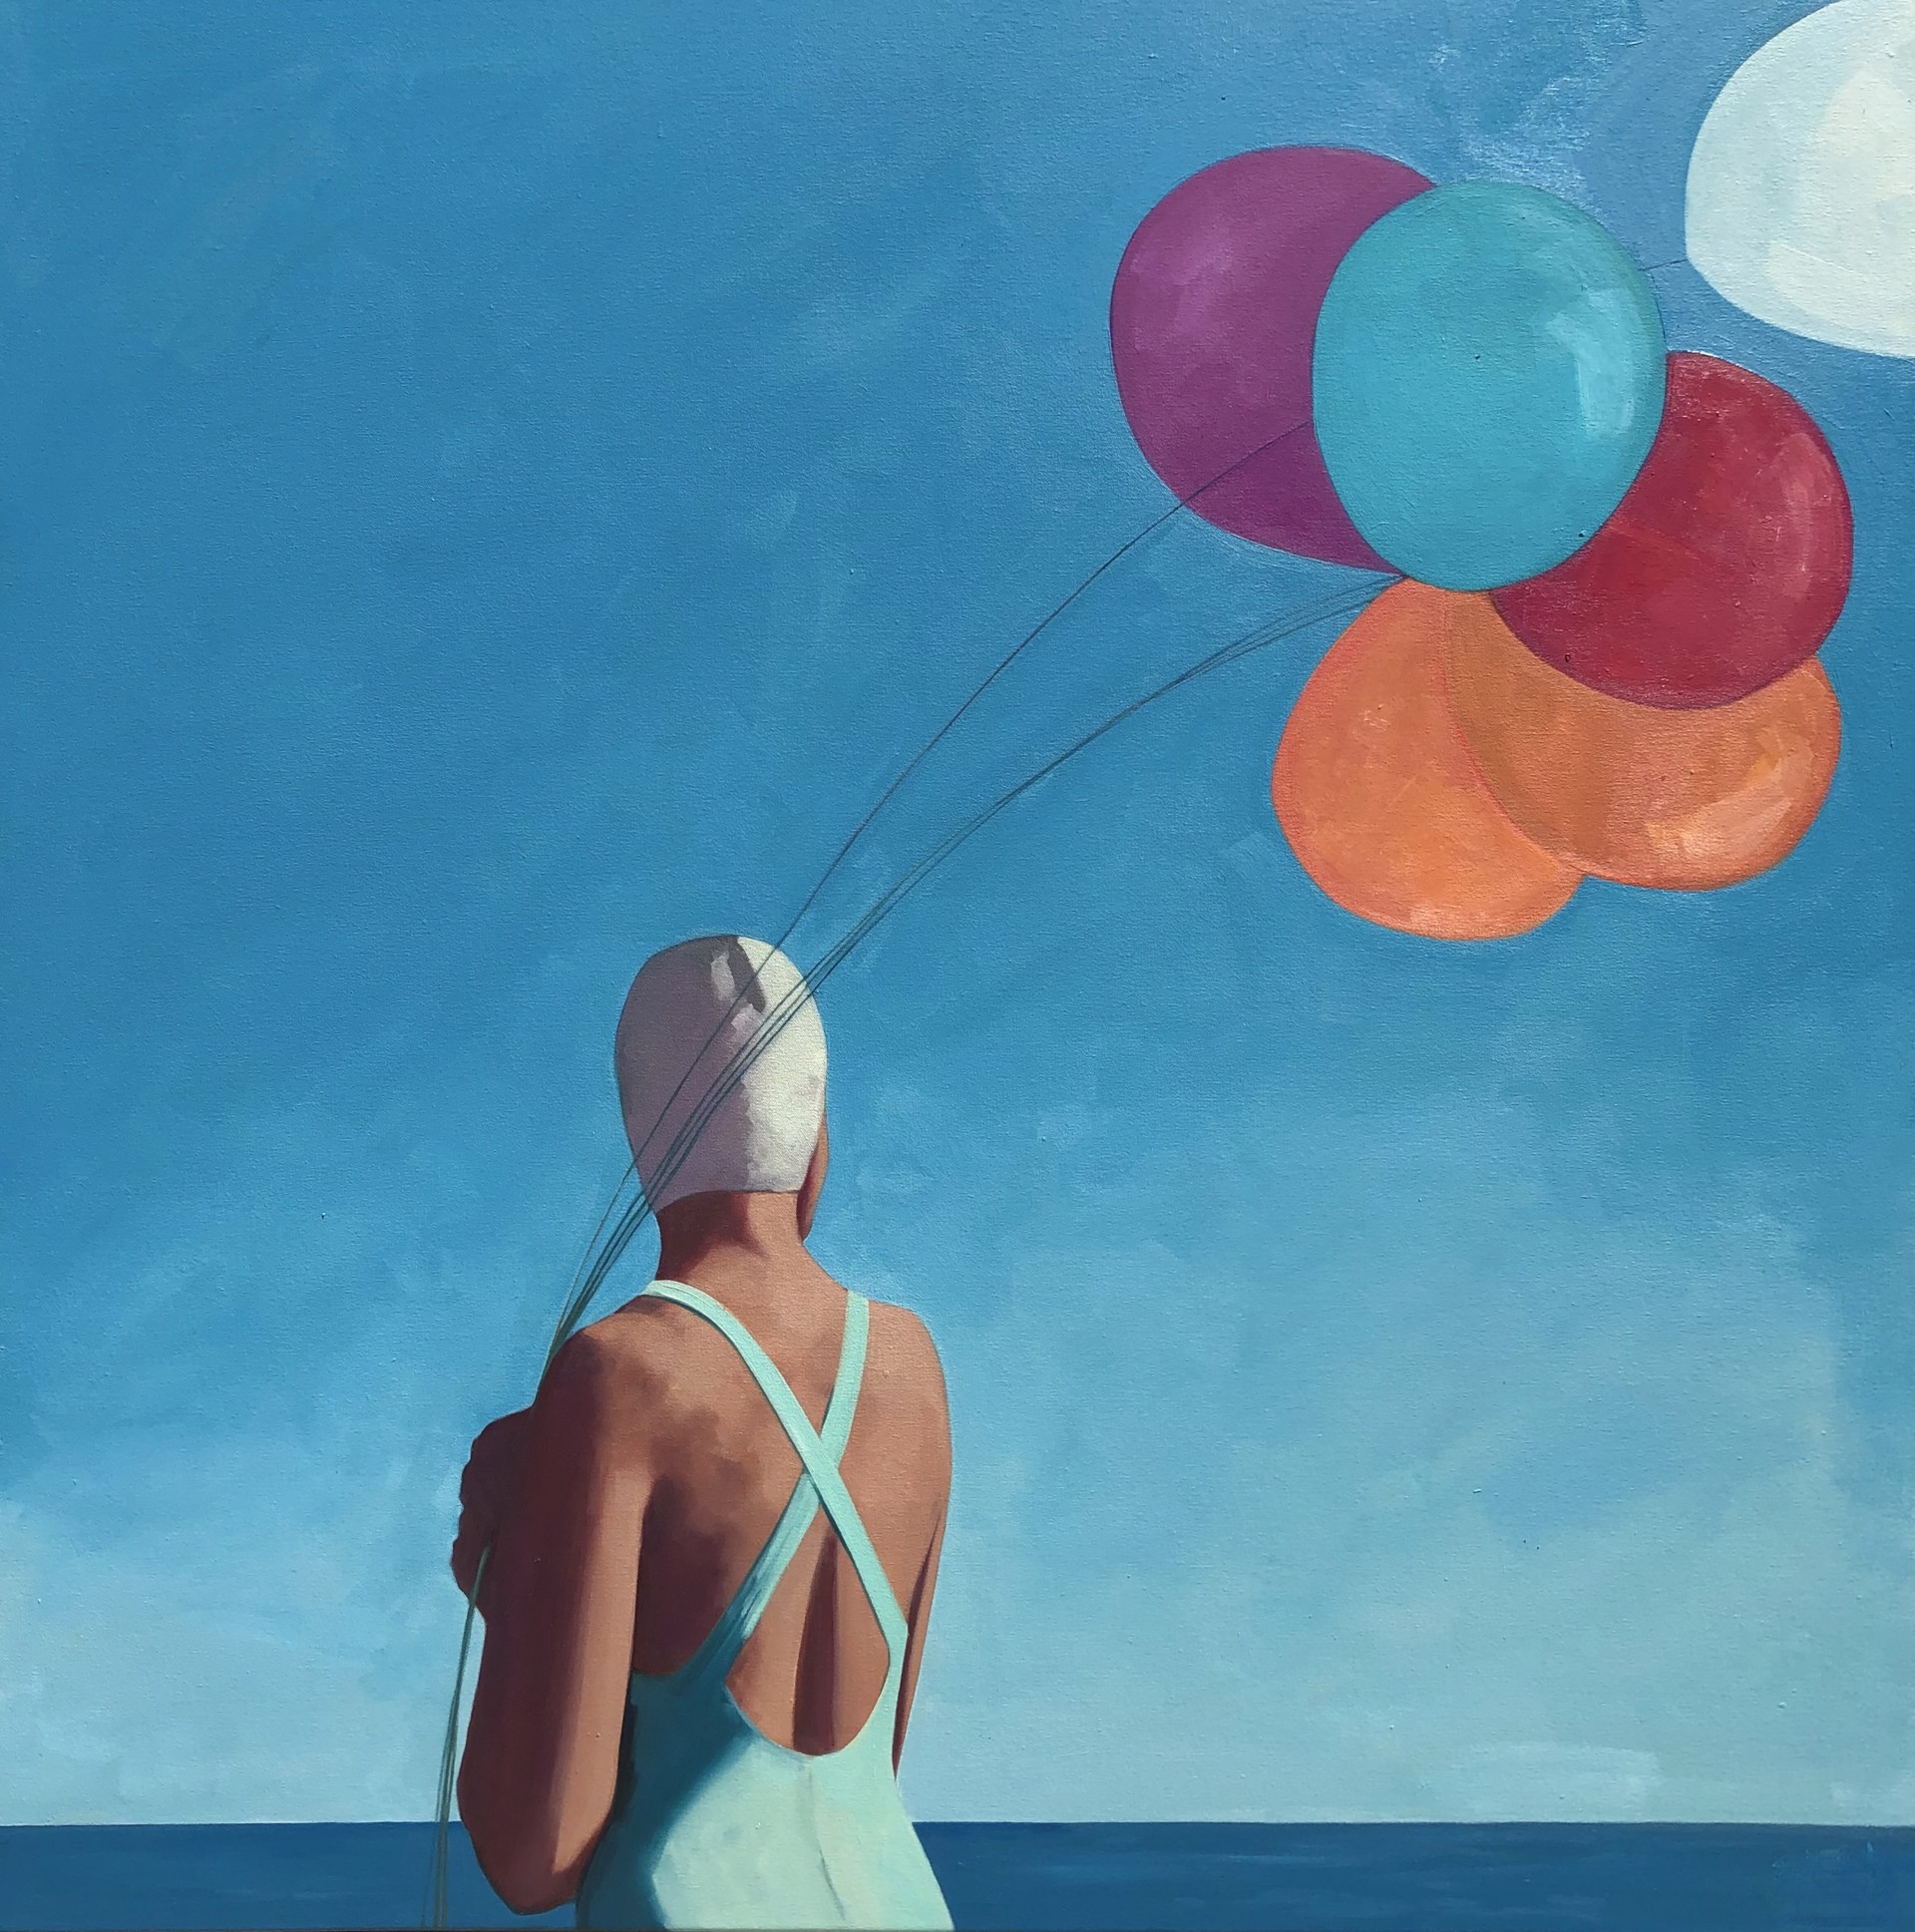 Summer Balloons by Tracey Sylvester Harris